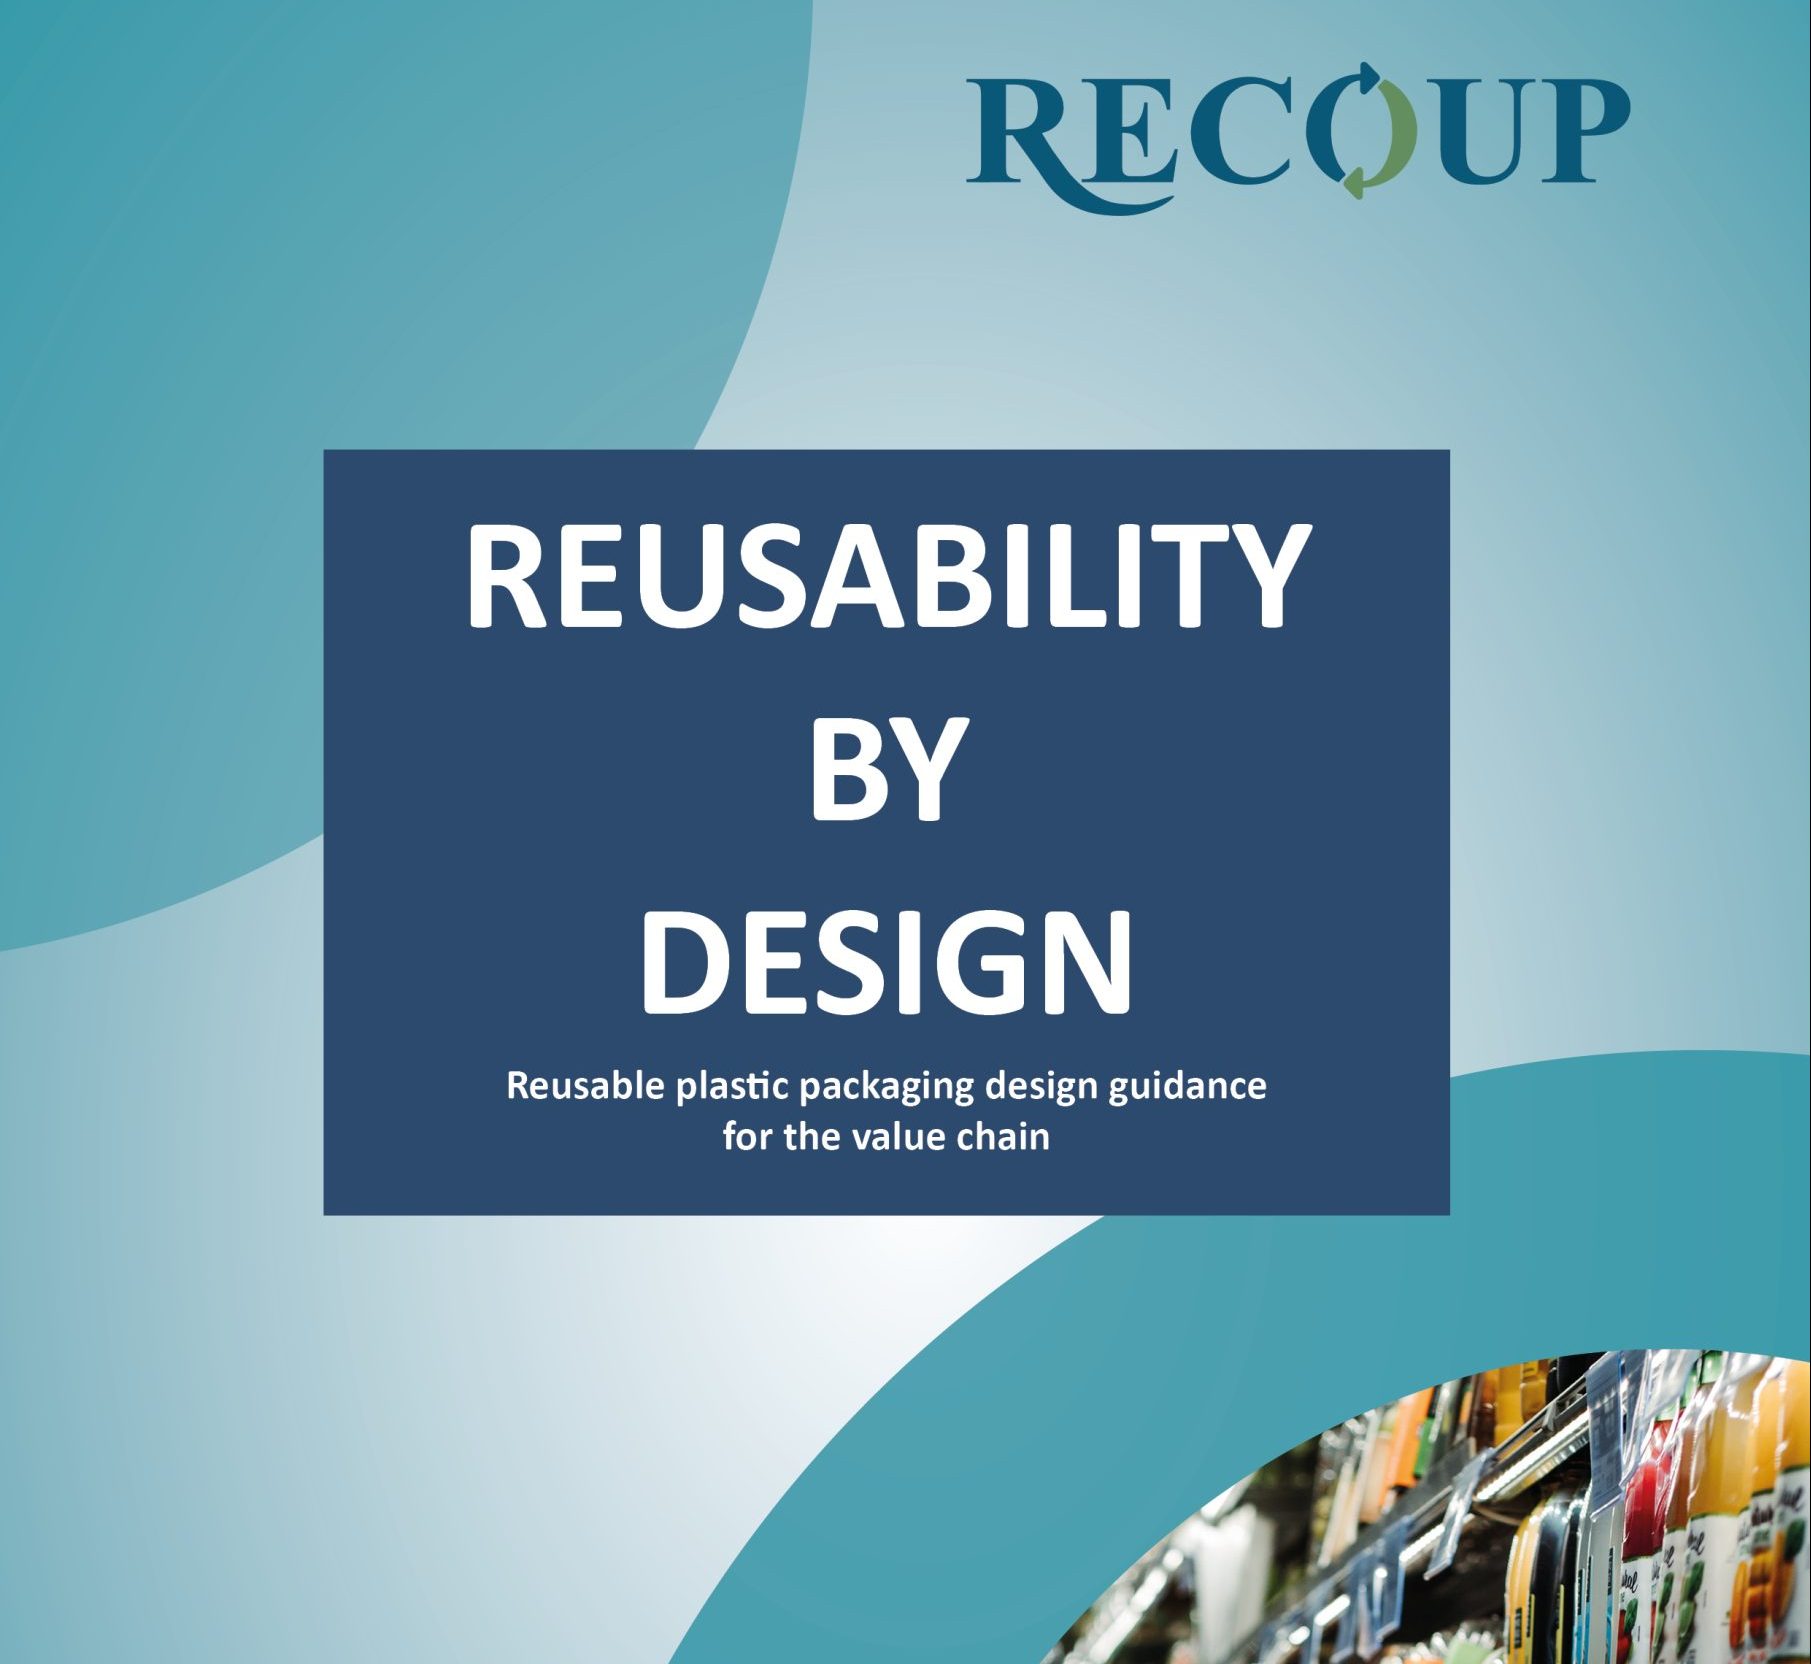 RECOUP Launch Inaugural ‘Reusability by Design’ Guidance